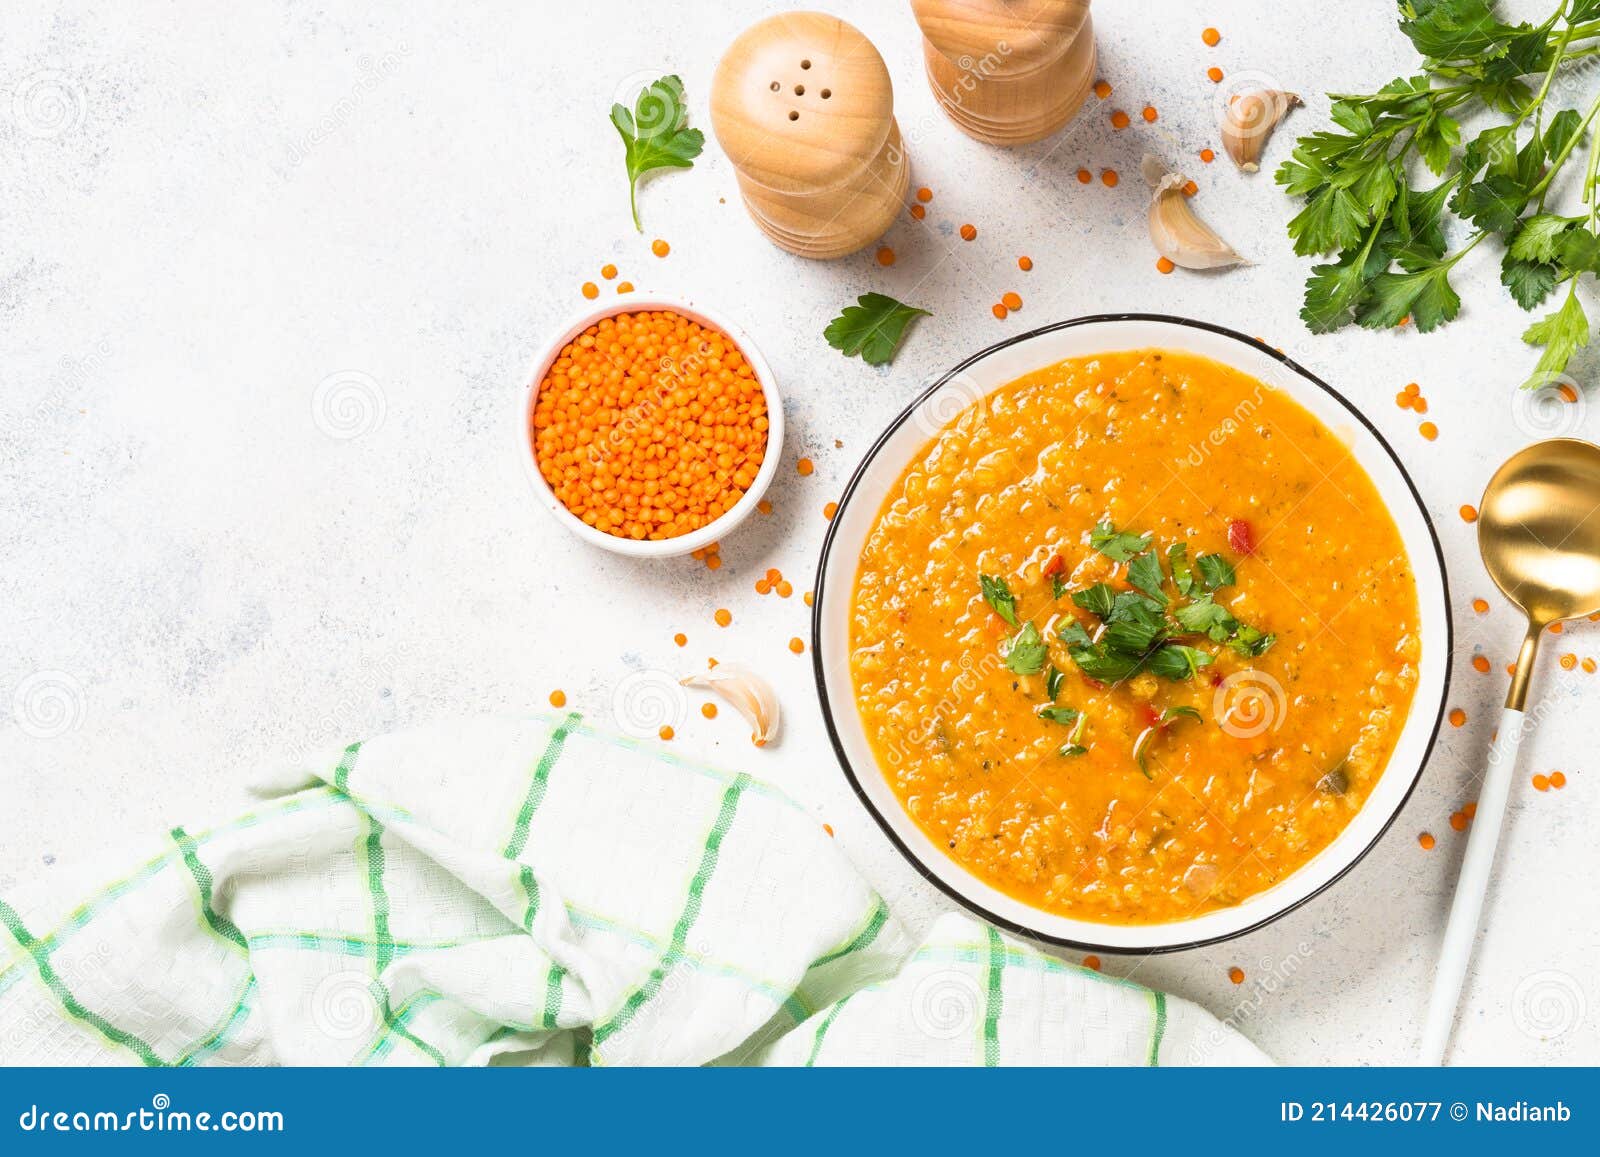 Lentil Soup with Vegetables at White Stone Table. Stock Image - Image ...